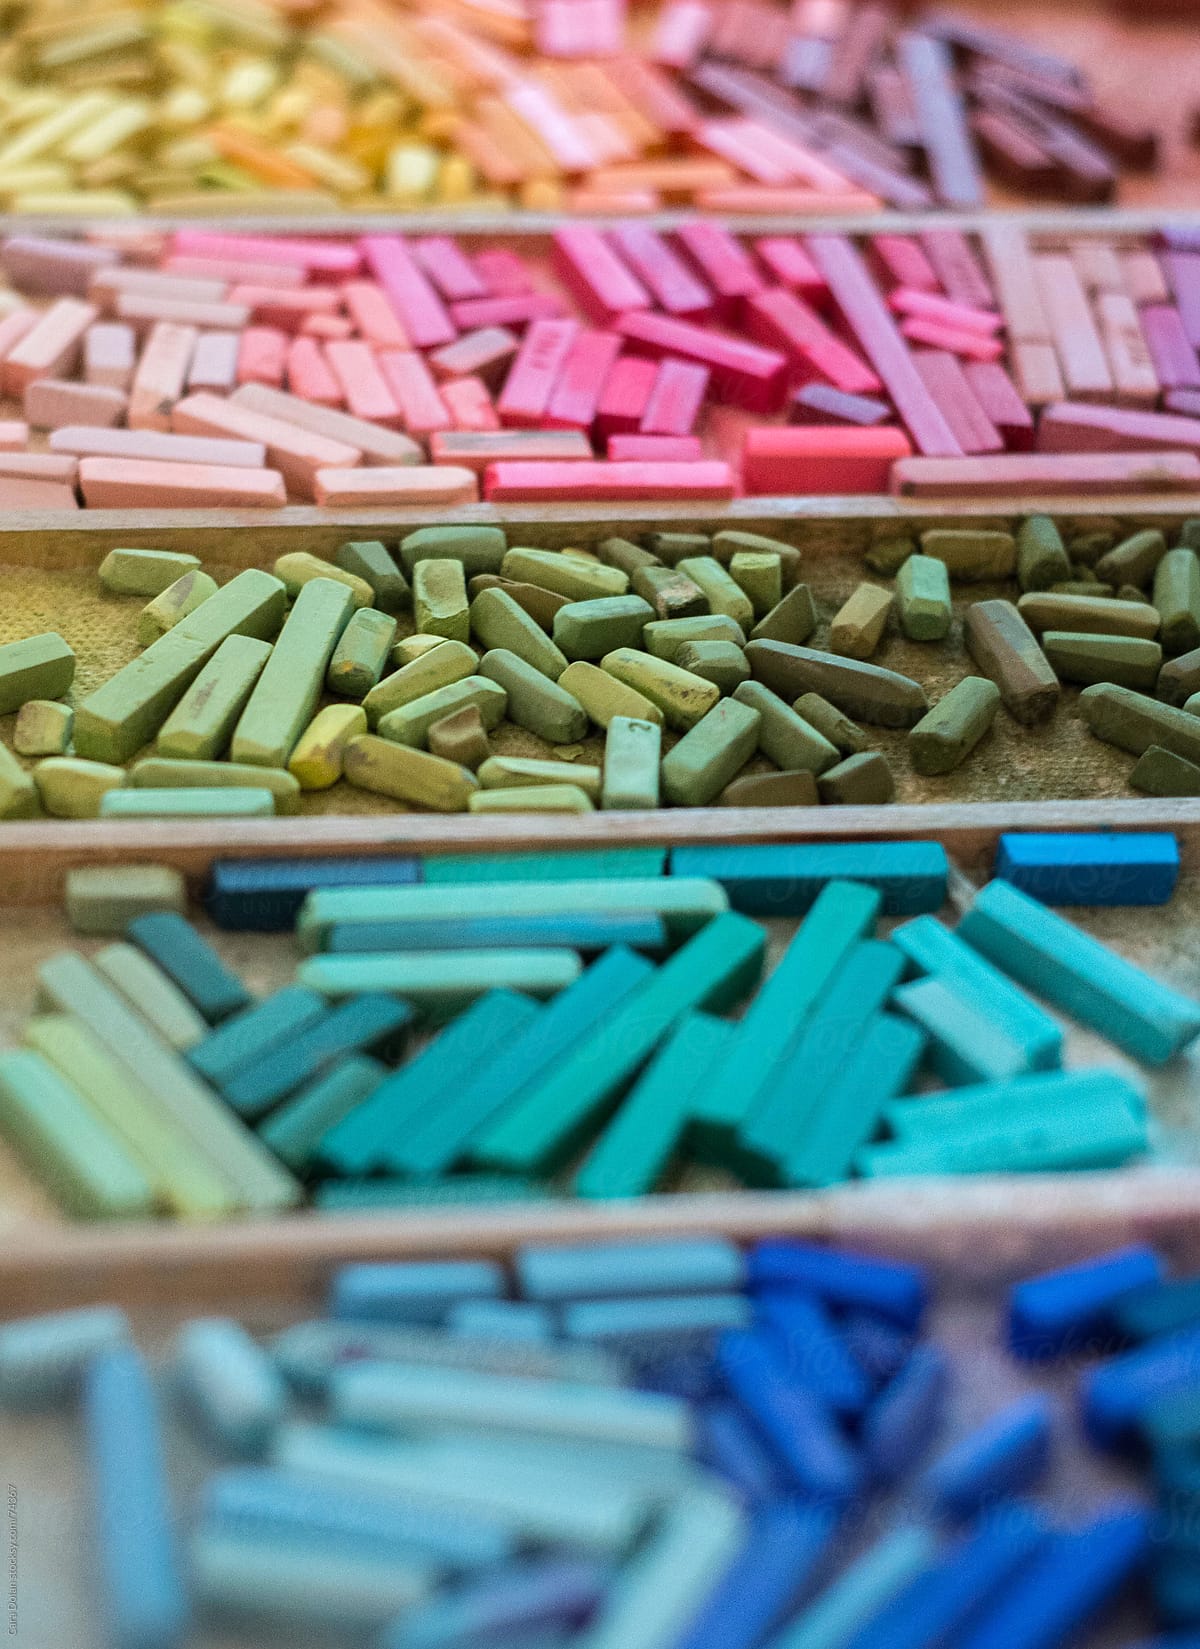 Artist's pastels organized by color on a tray